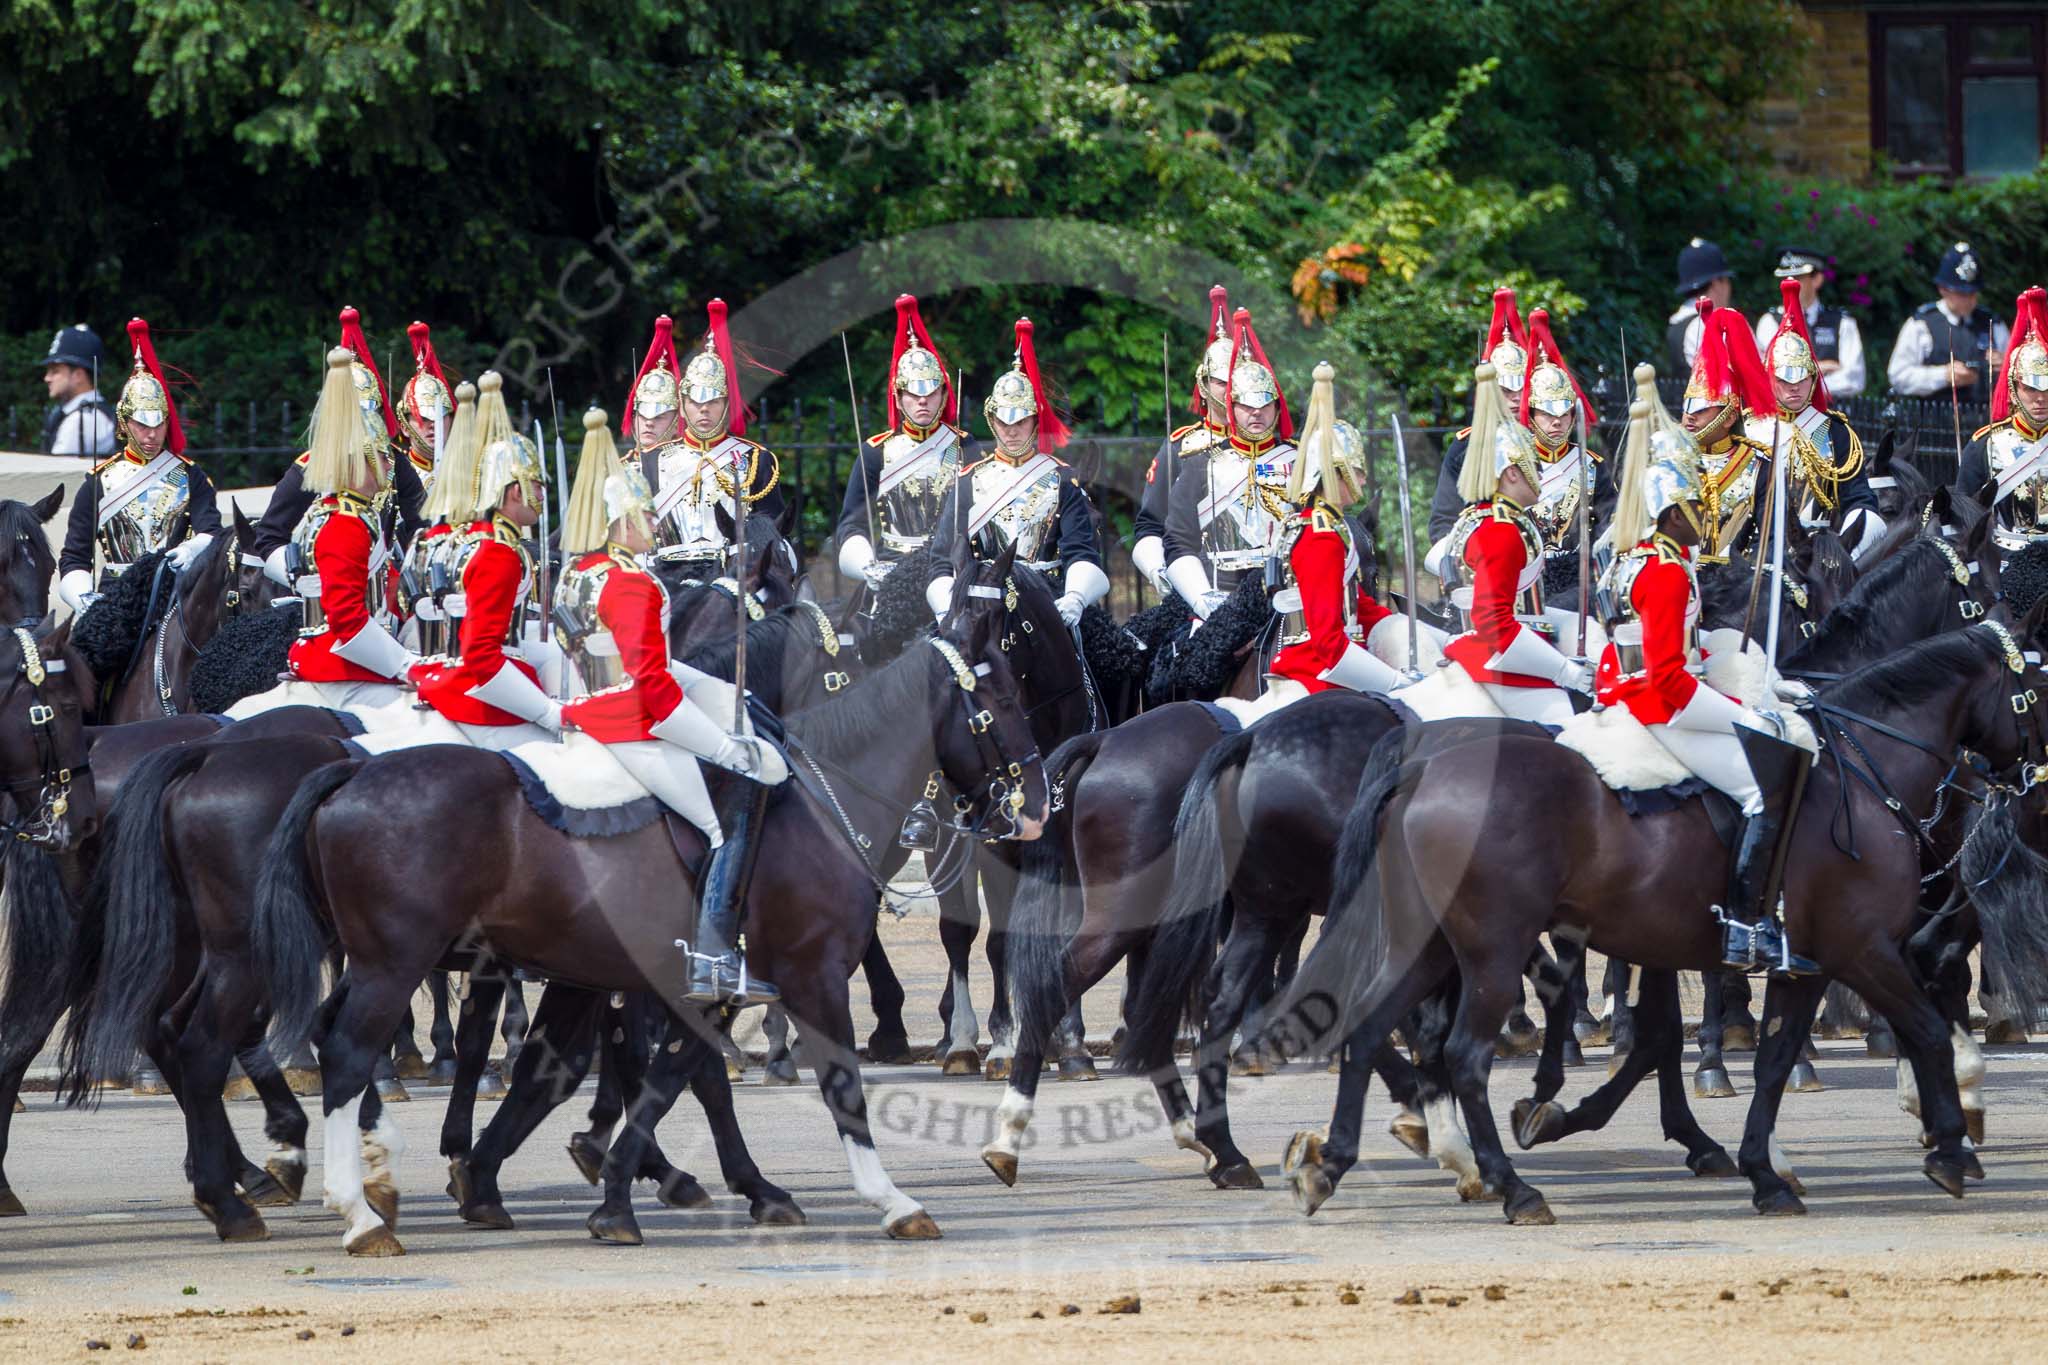 The Colonel's Review 2015.
Horse Guards Parade, Westminster,
London,

United Kingdom,
on 06 June 2015 at 12:02, image #565